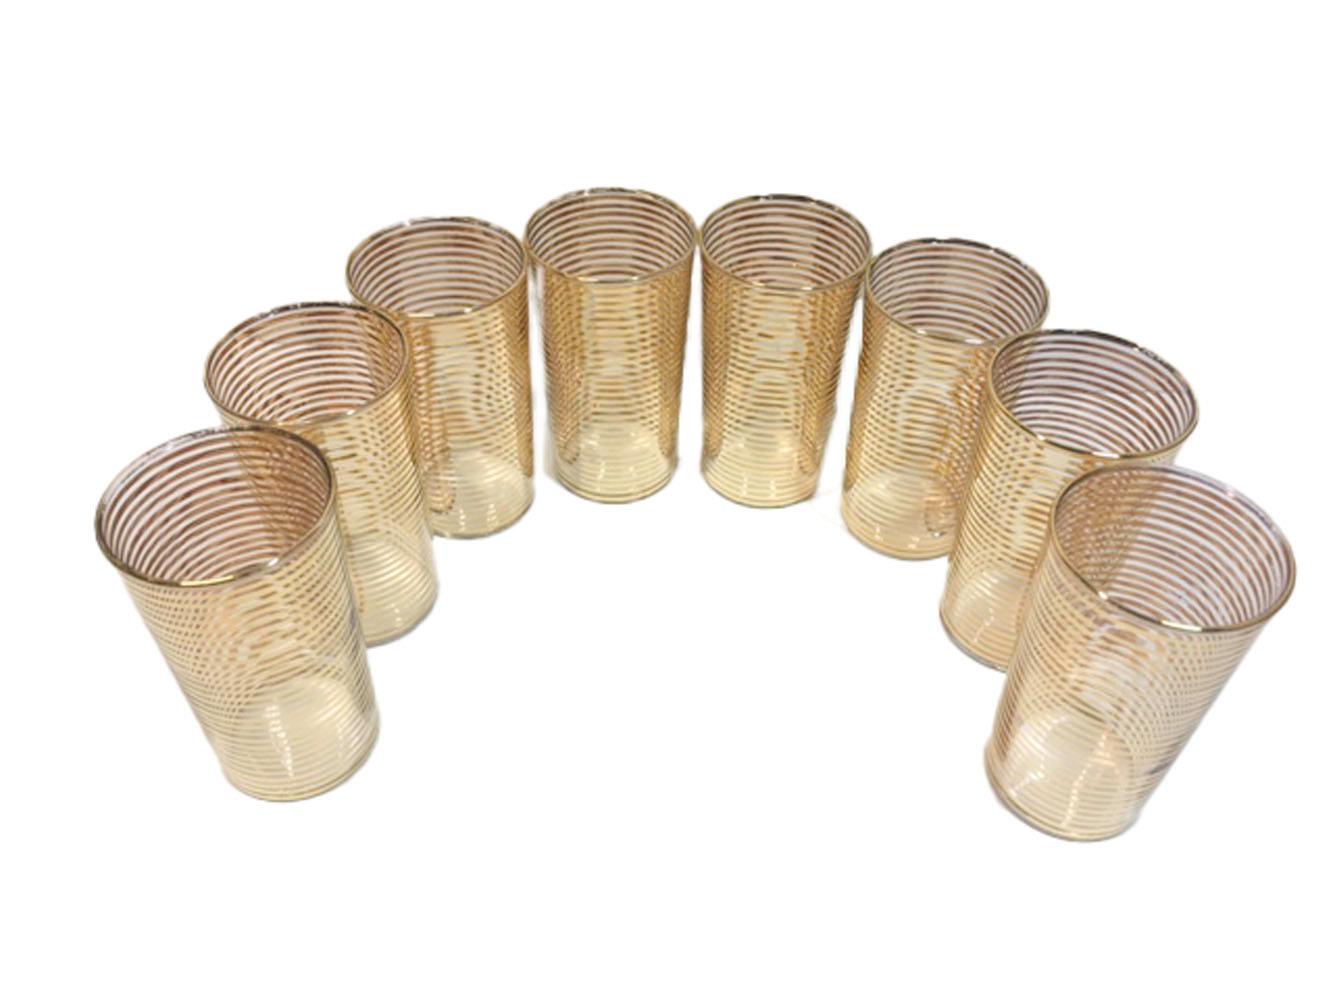 Set of 8 Art Deco highball glasses with alternating gold and clear bands.